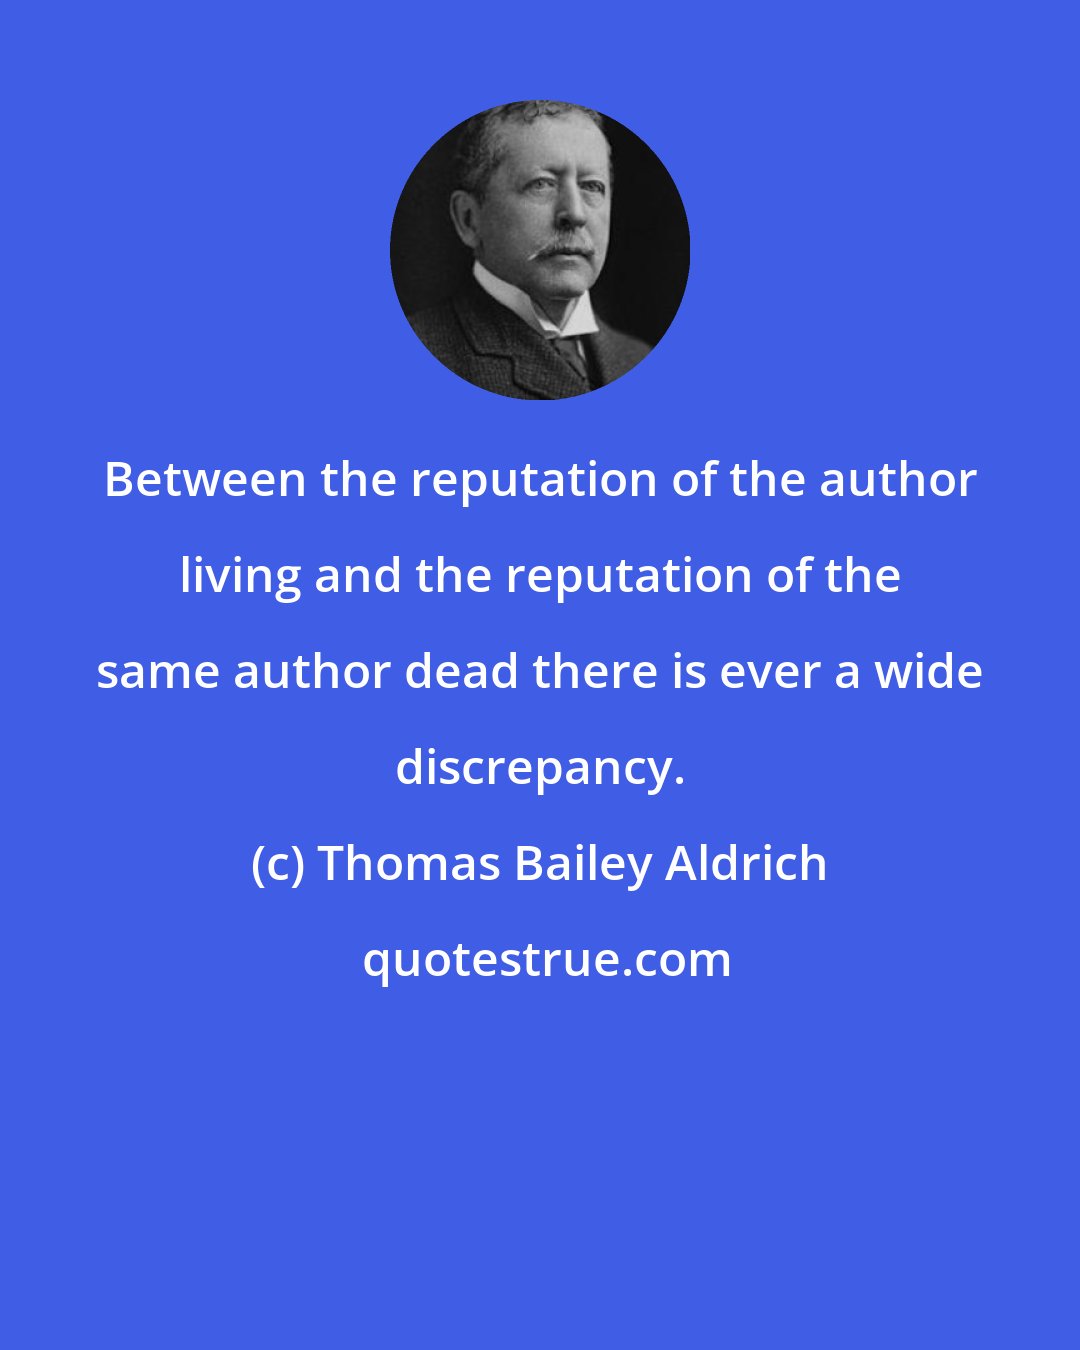 Thomas Bailey Aldrich: Between the reputation of the author living and the reputation of the same author dead there is ever a wide discrepancy.